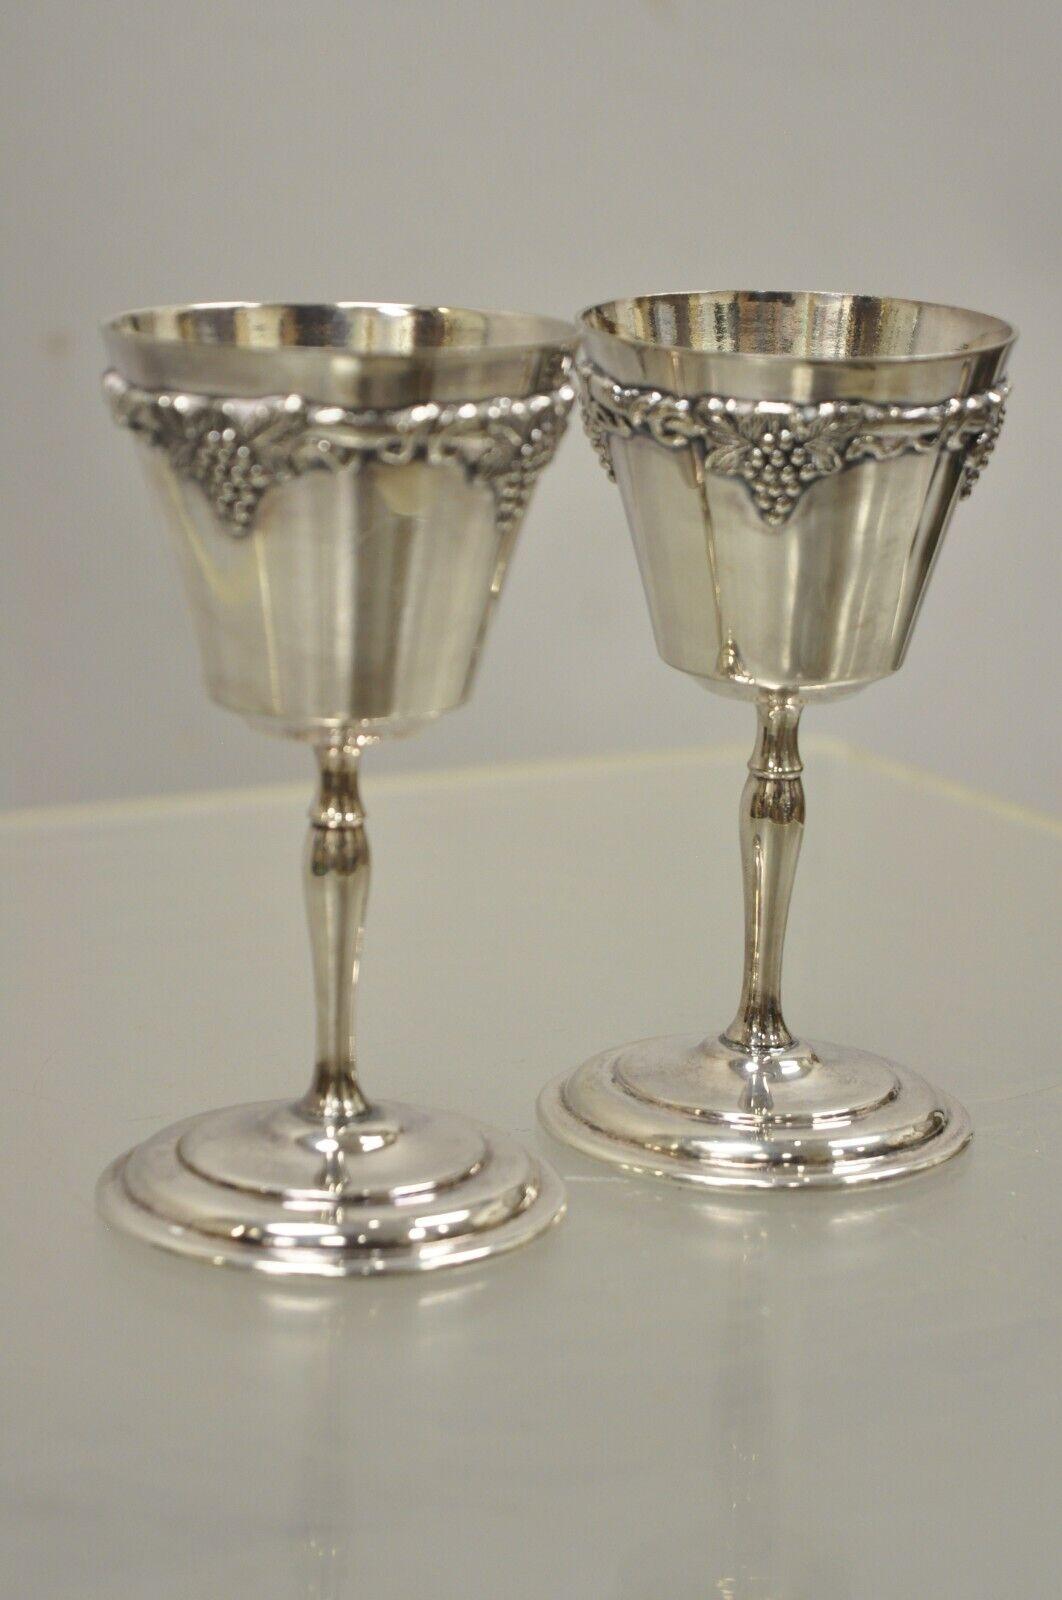 Antique Old English Repro Silver Plated Sherry Wine Liquor Goblet Cups Set of 2 3